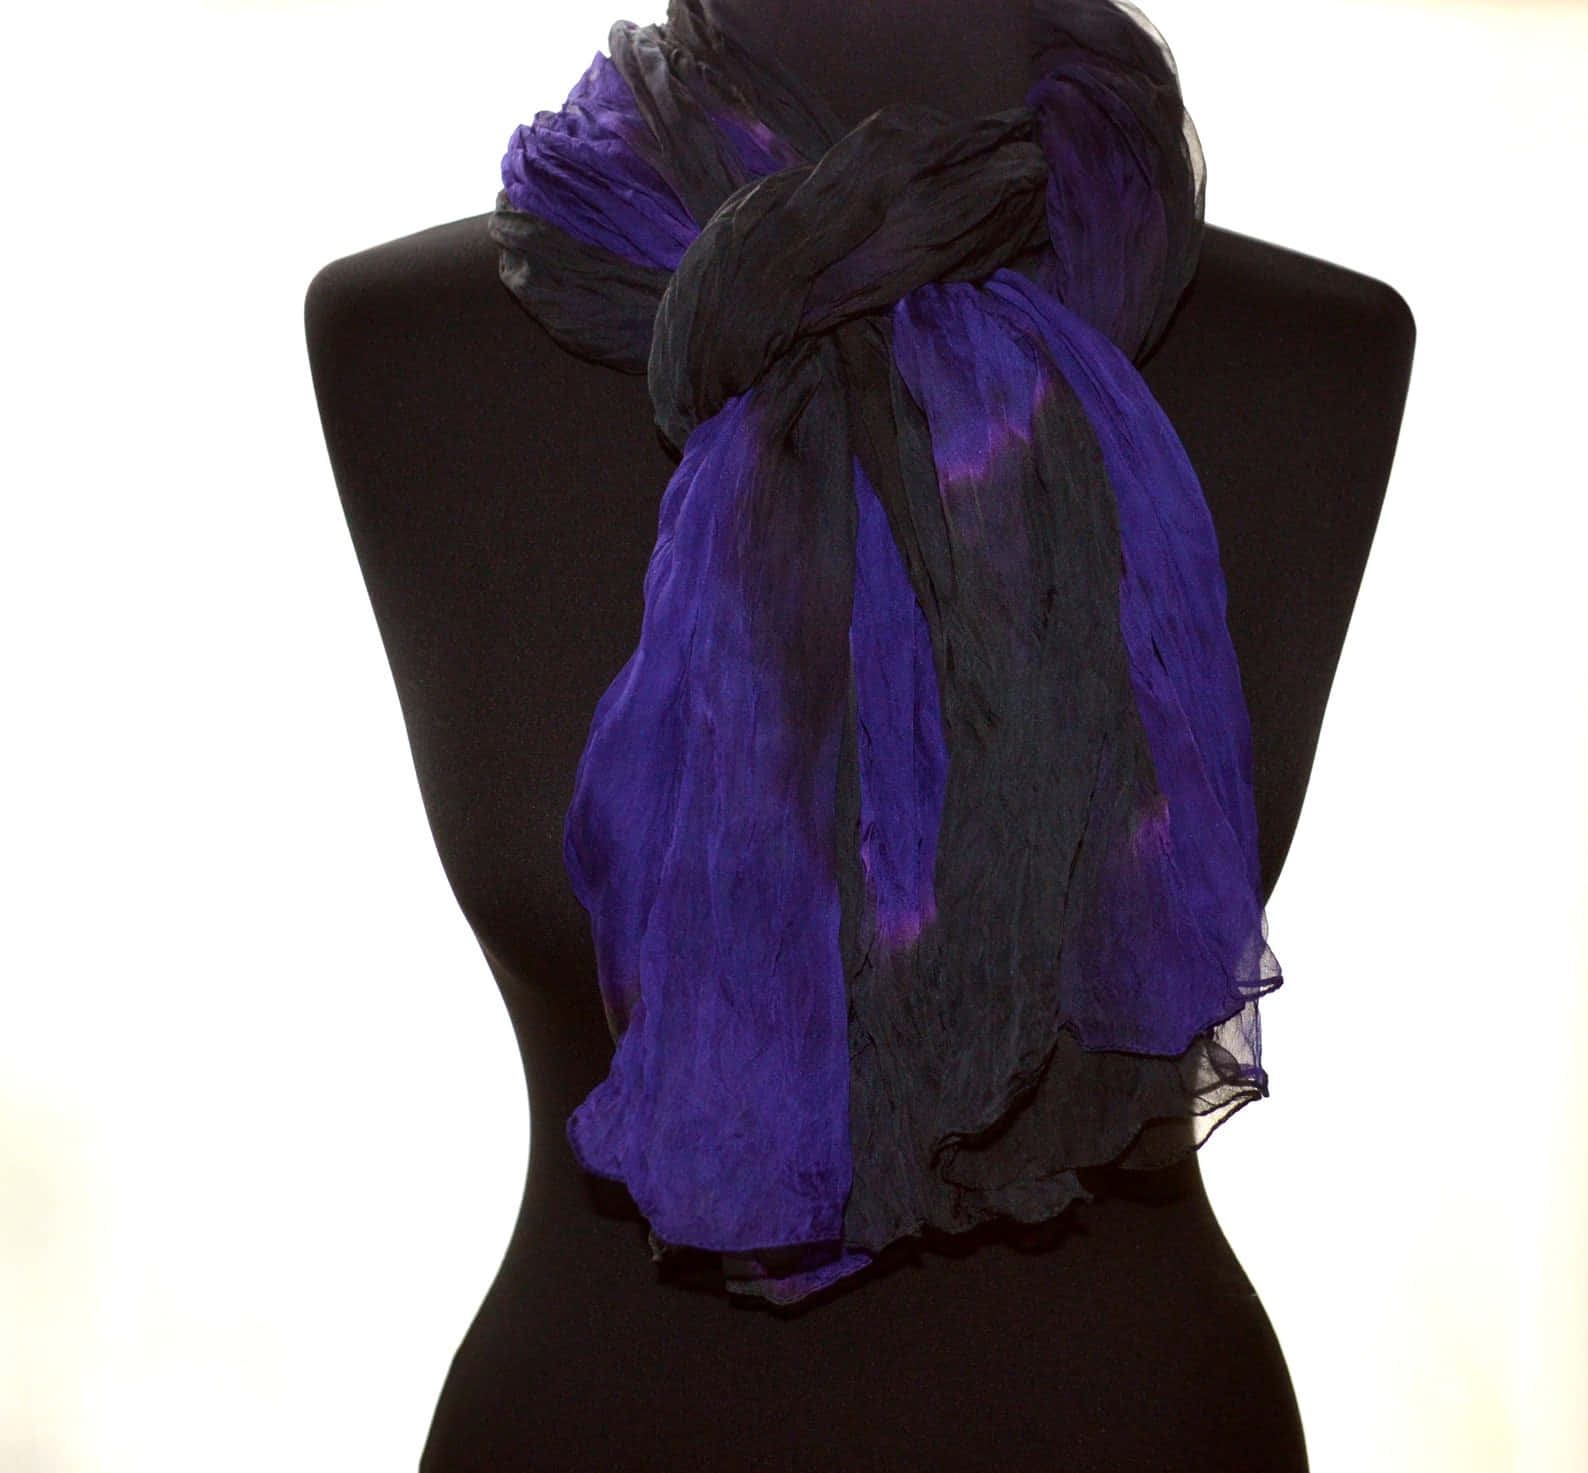 "Wrap yourself up in luxury with Purple Scarf" Wallpaper